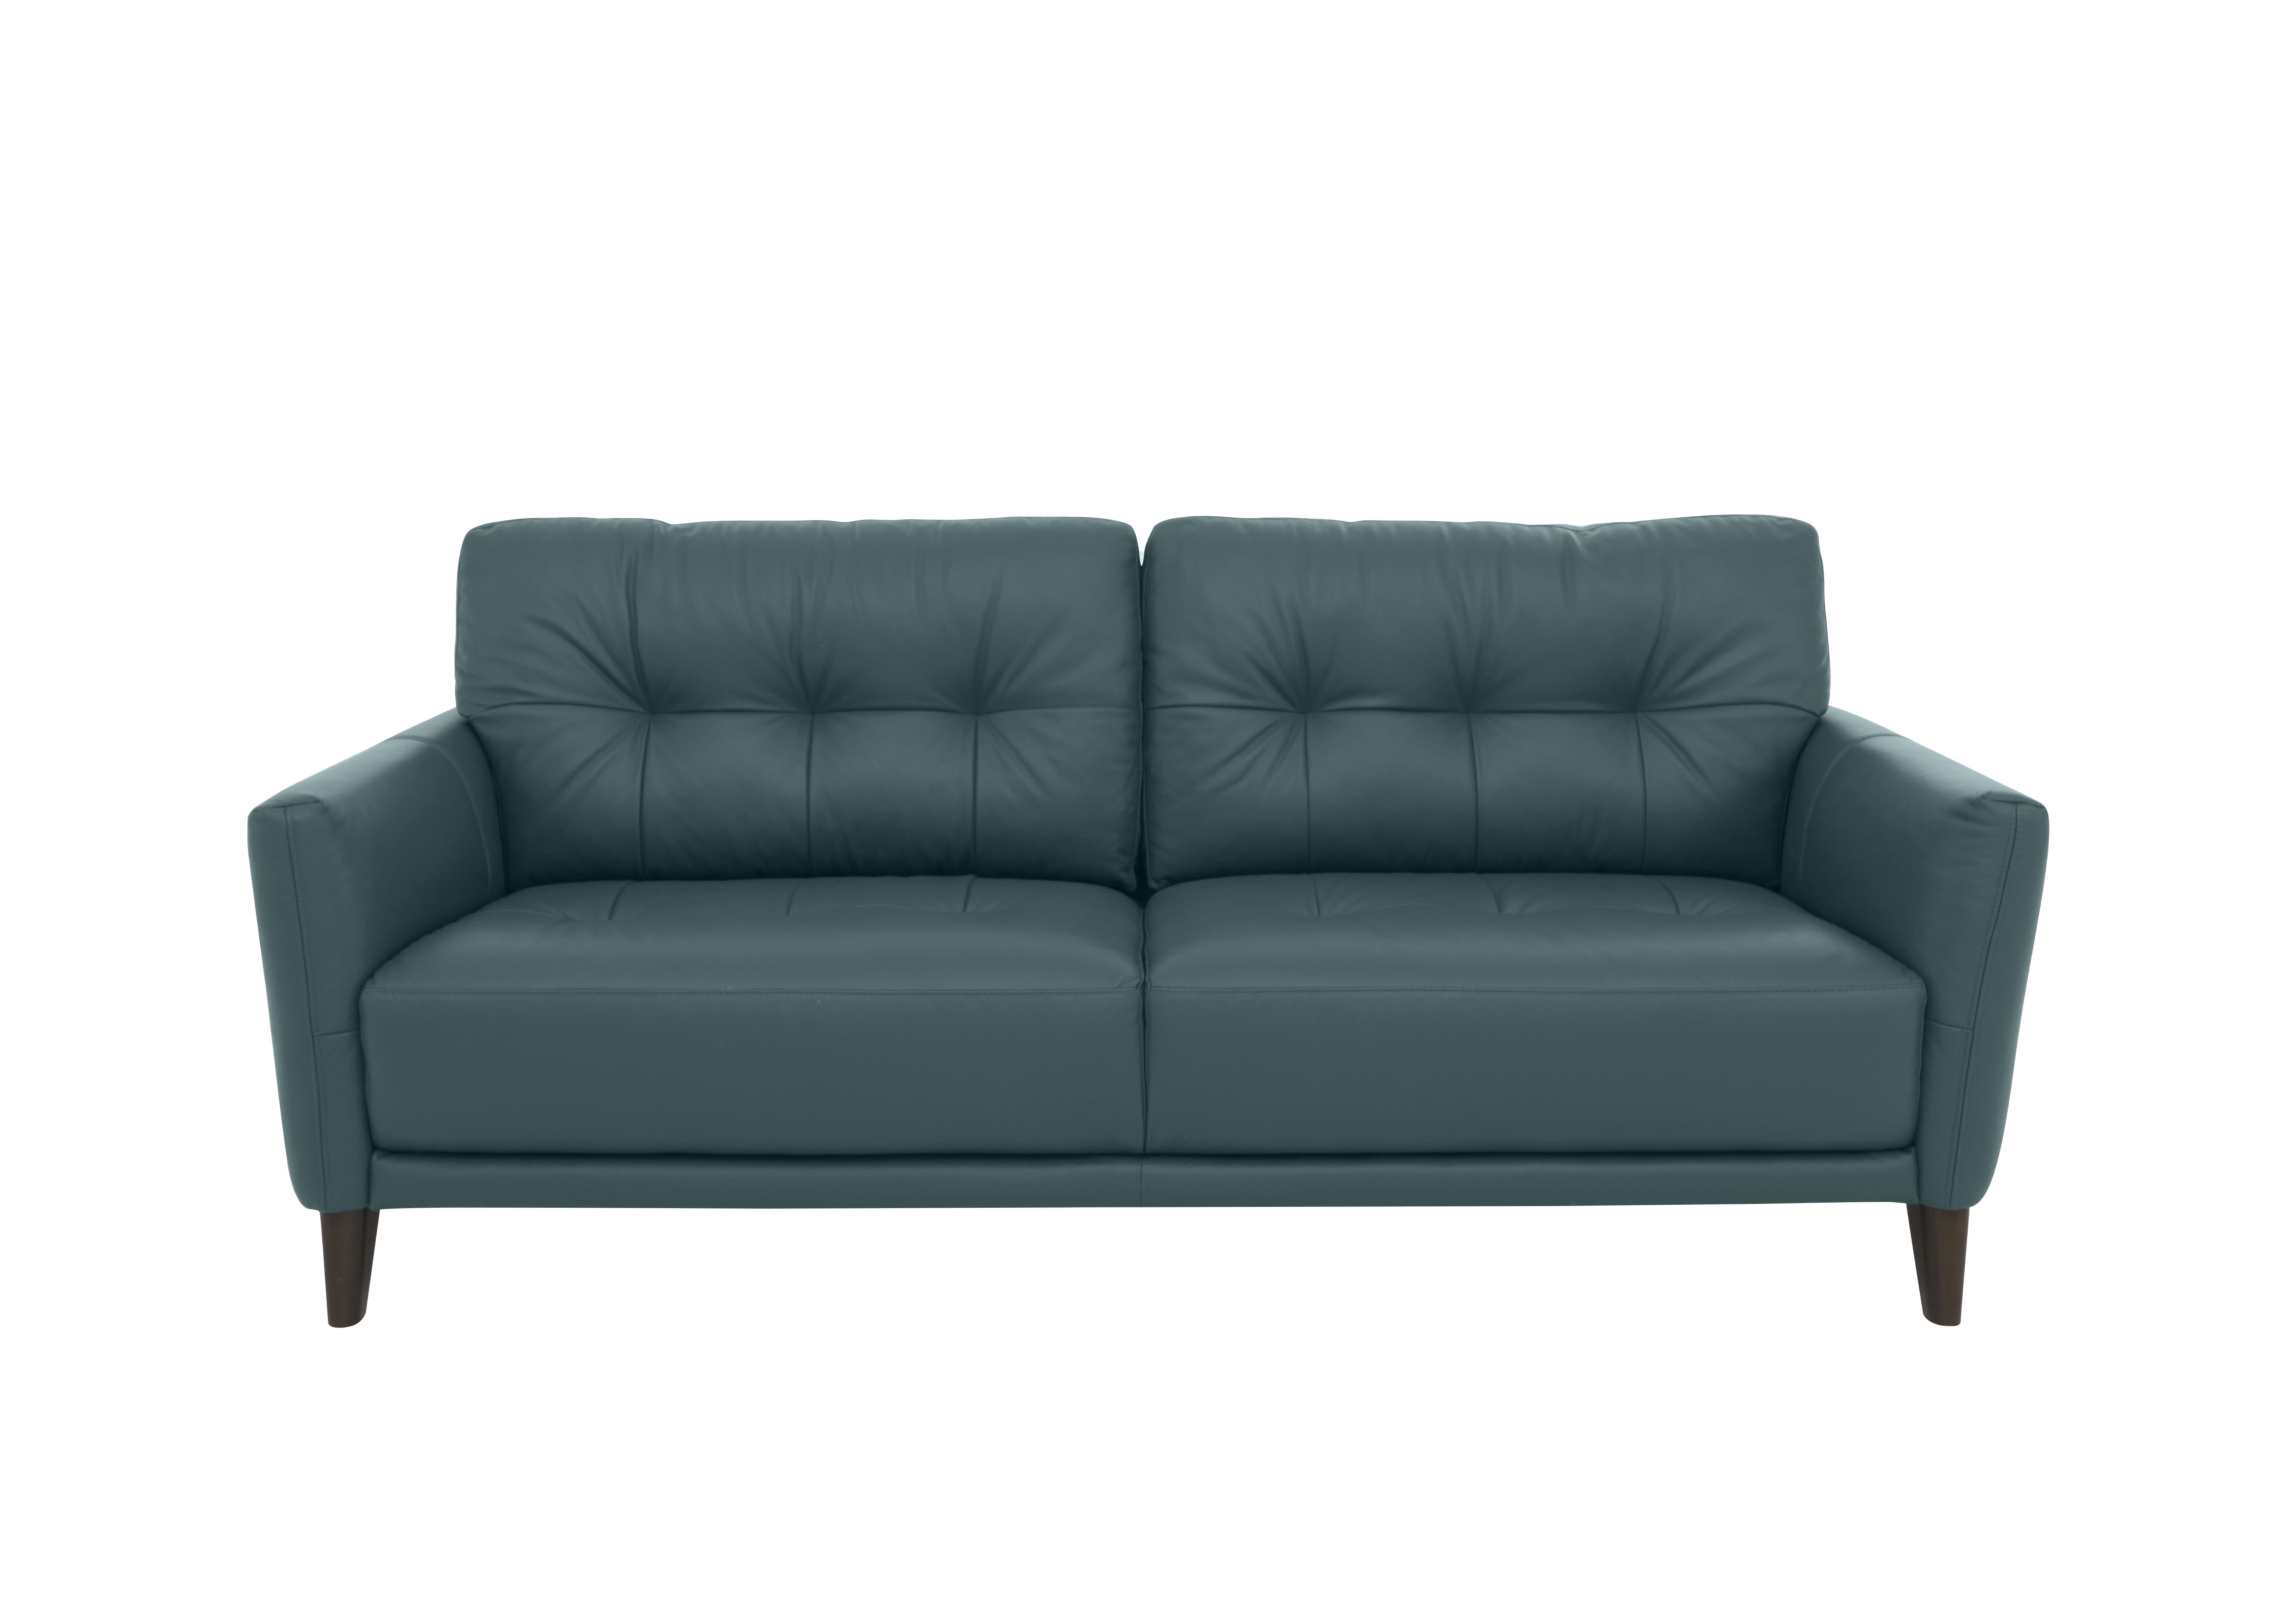 Uno Leather 3 Seater Sofa in Bv-301e Lake Green on Furniture Village